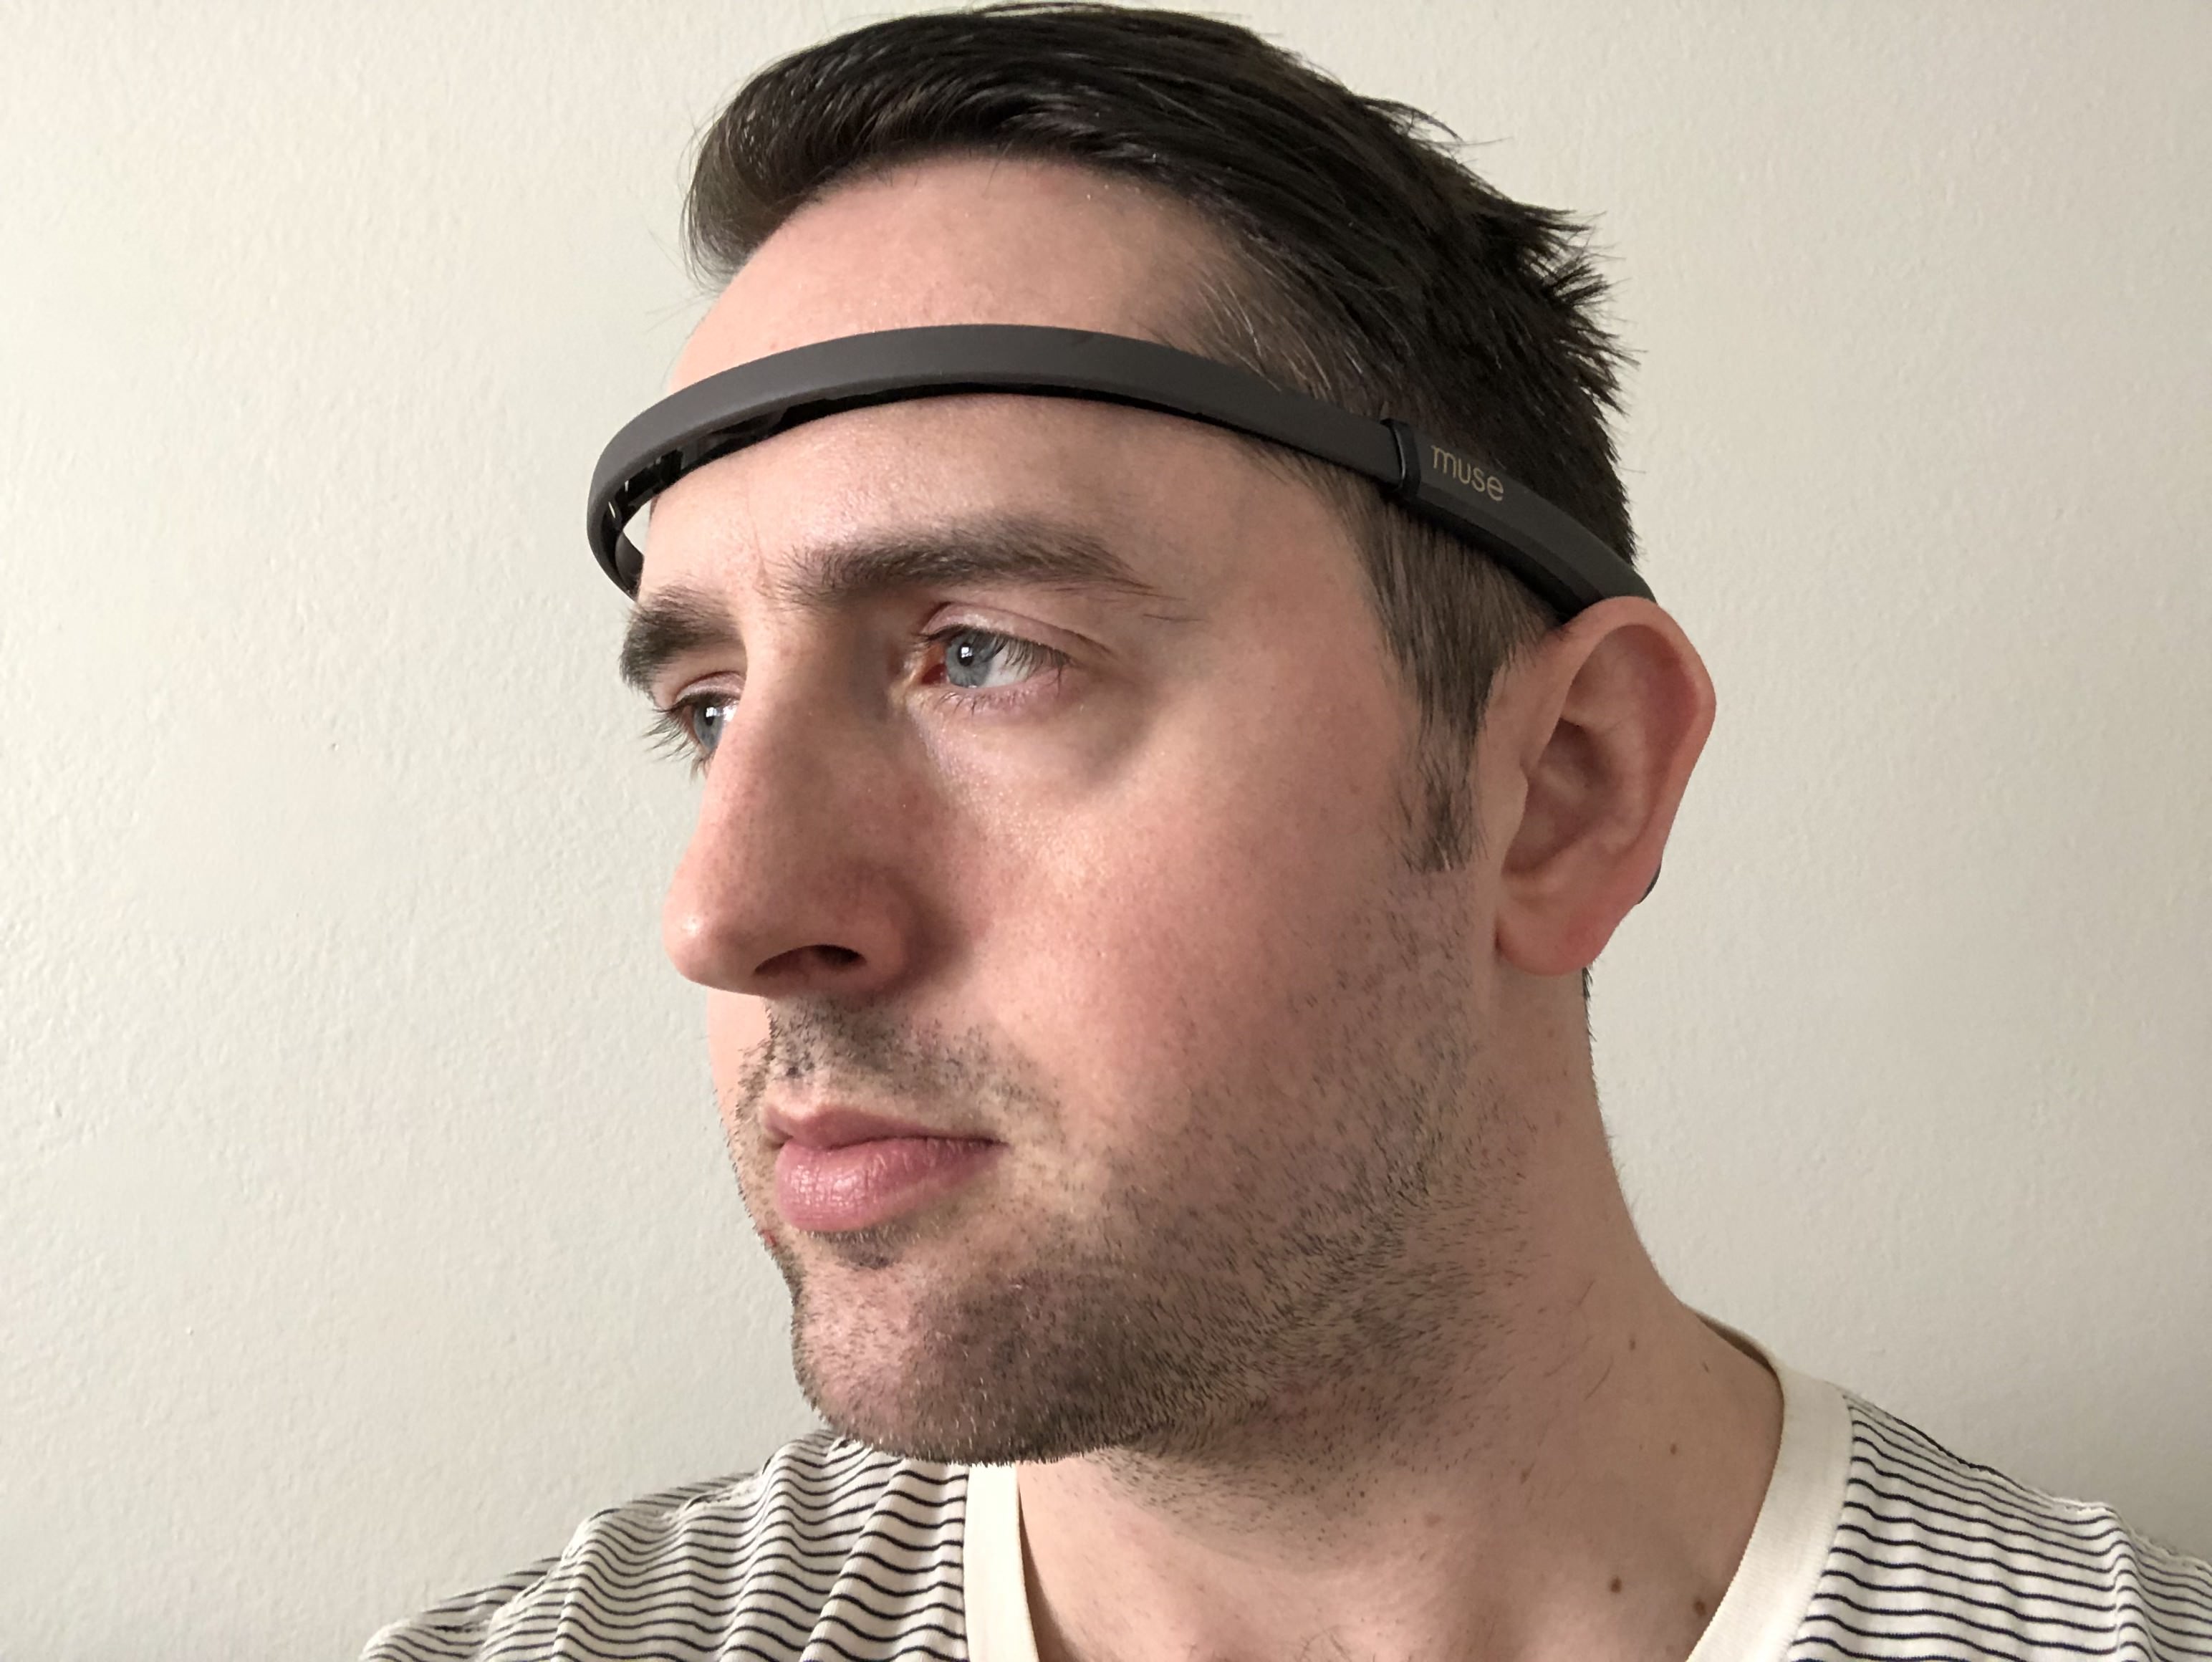 The author wearing an electronic headband that goes across his forehead.